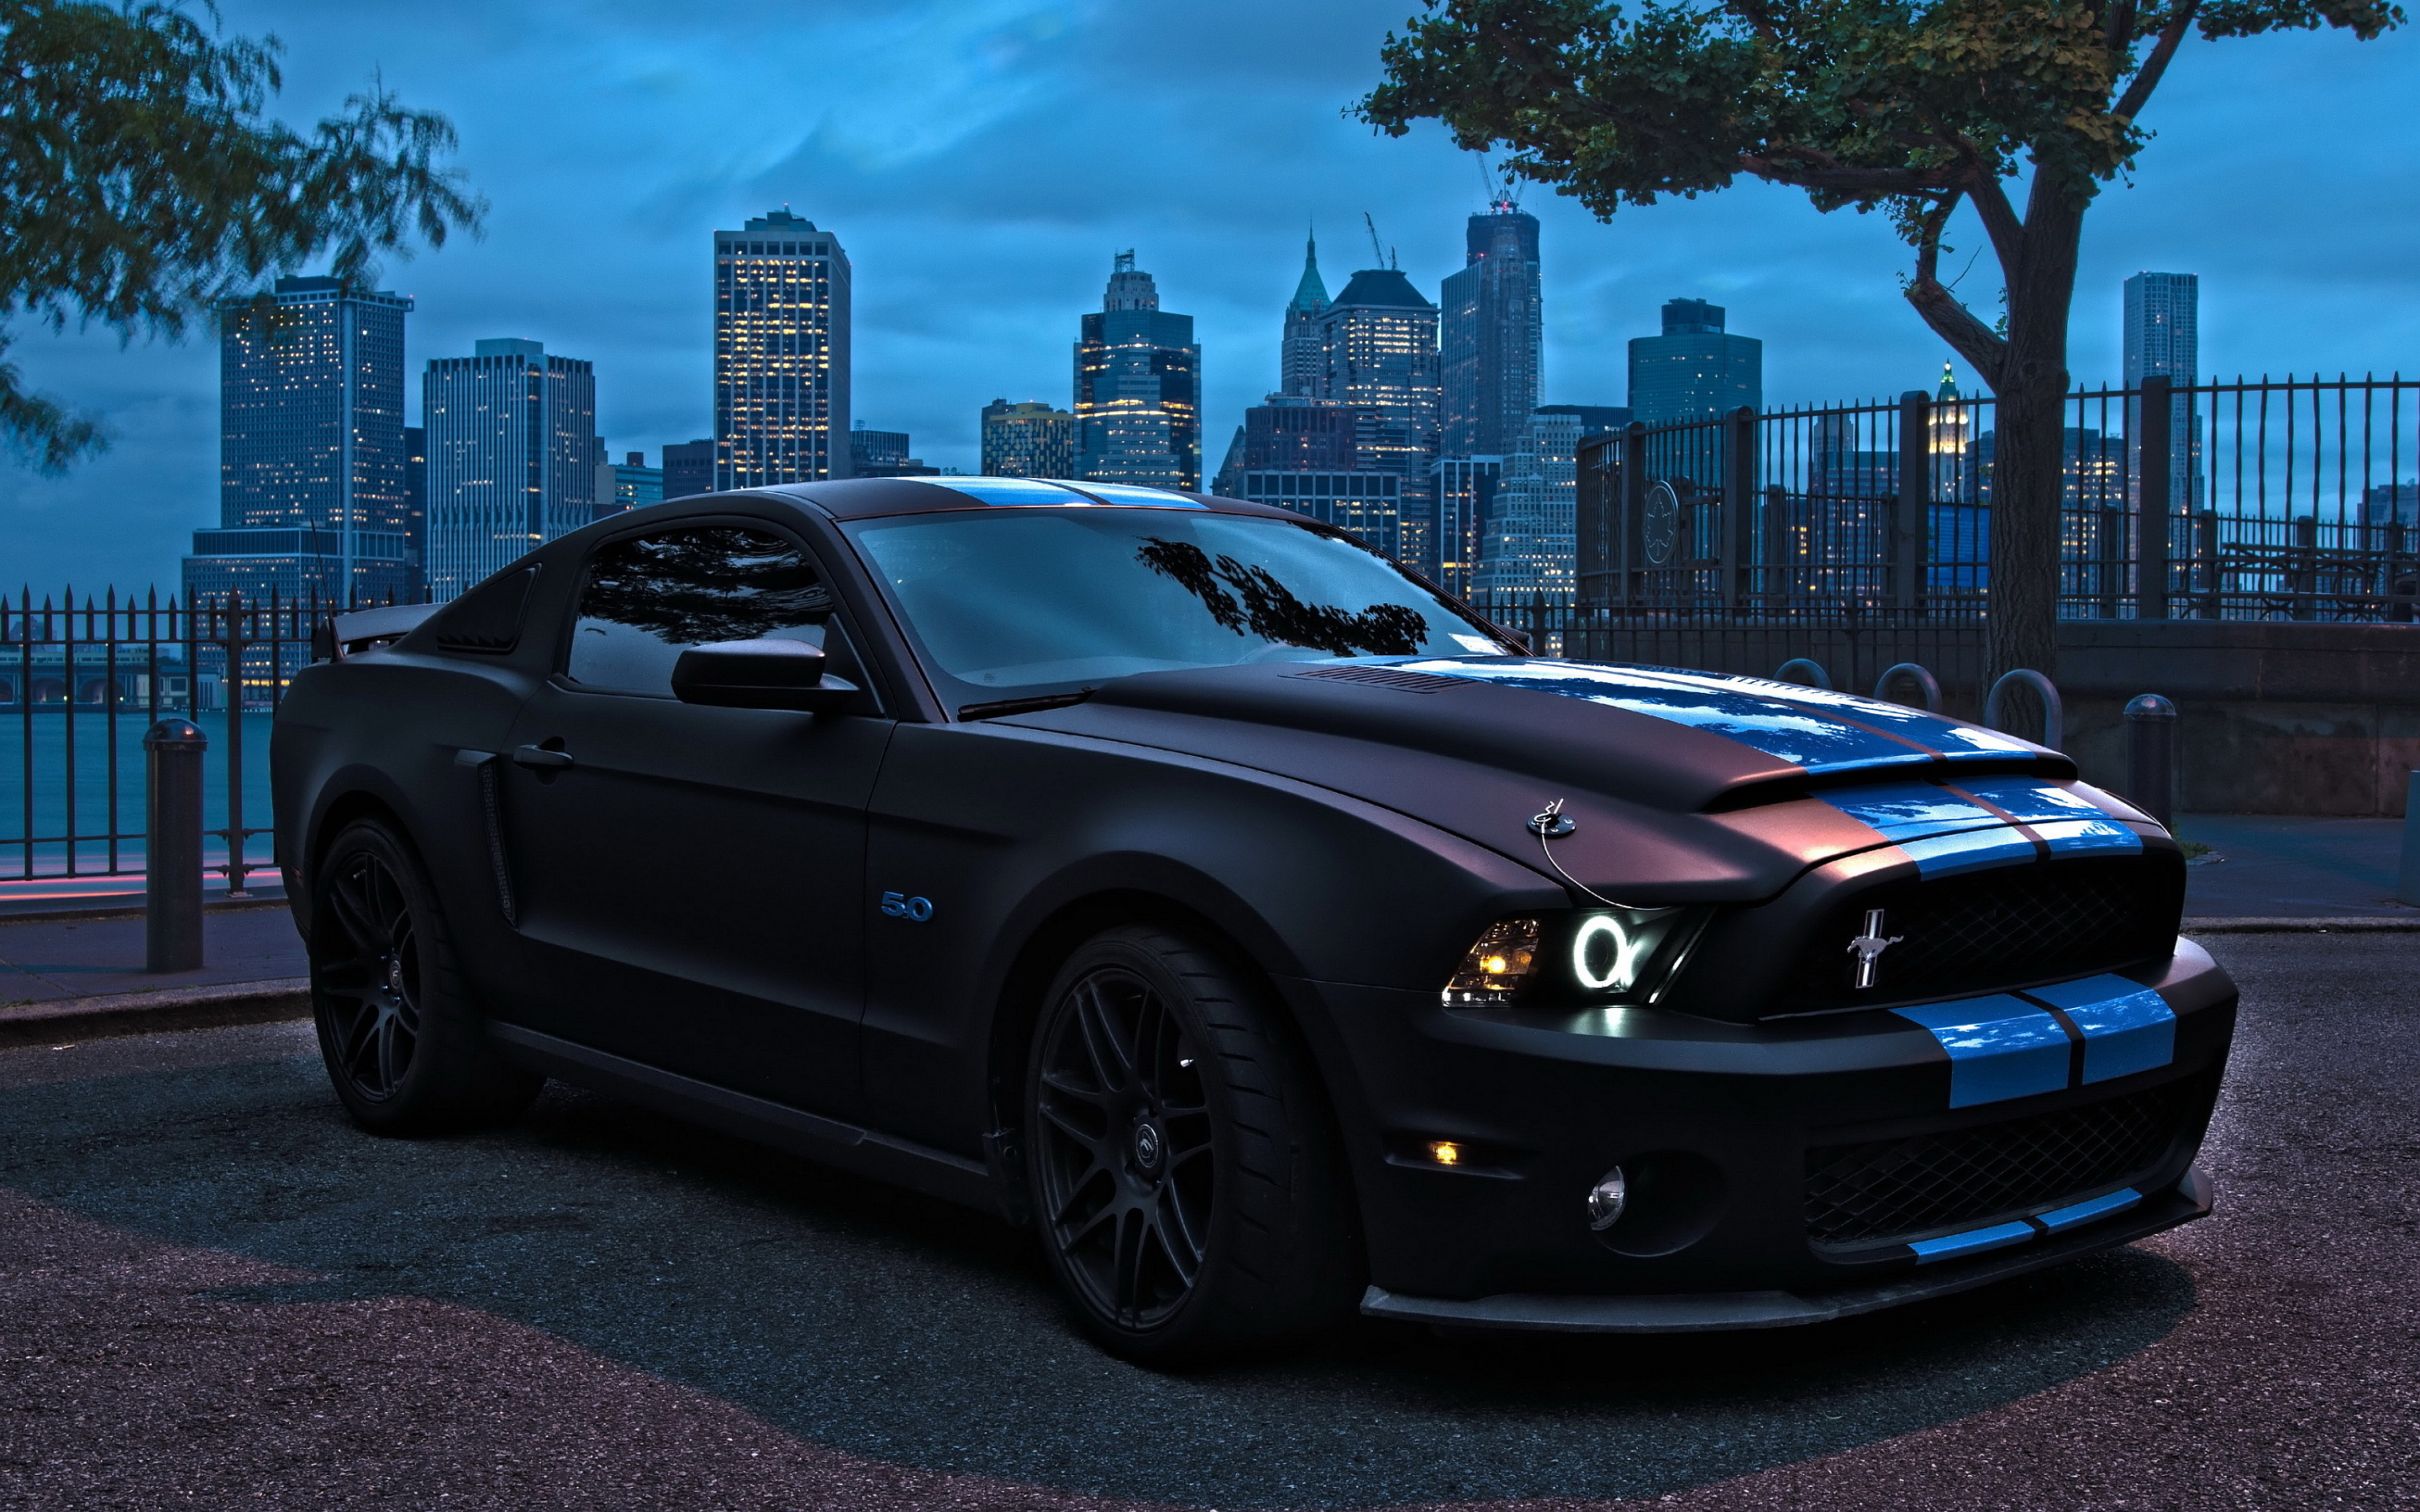 Ford Mustang Shelby Gt Black Wallpaper HD For iPhone